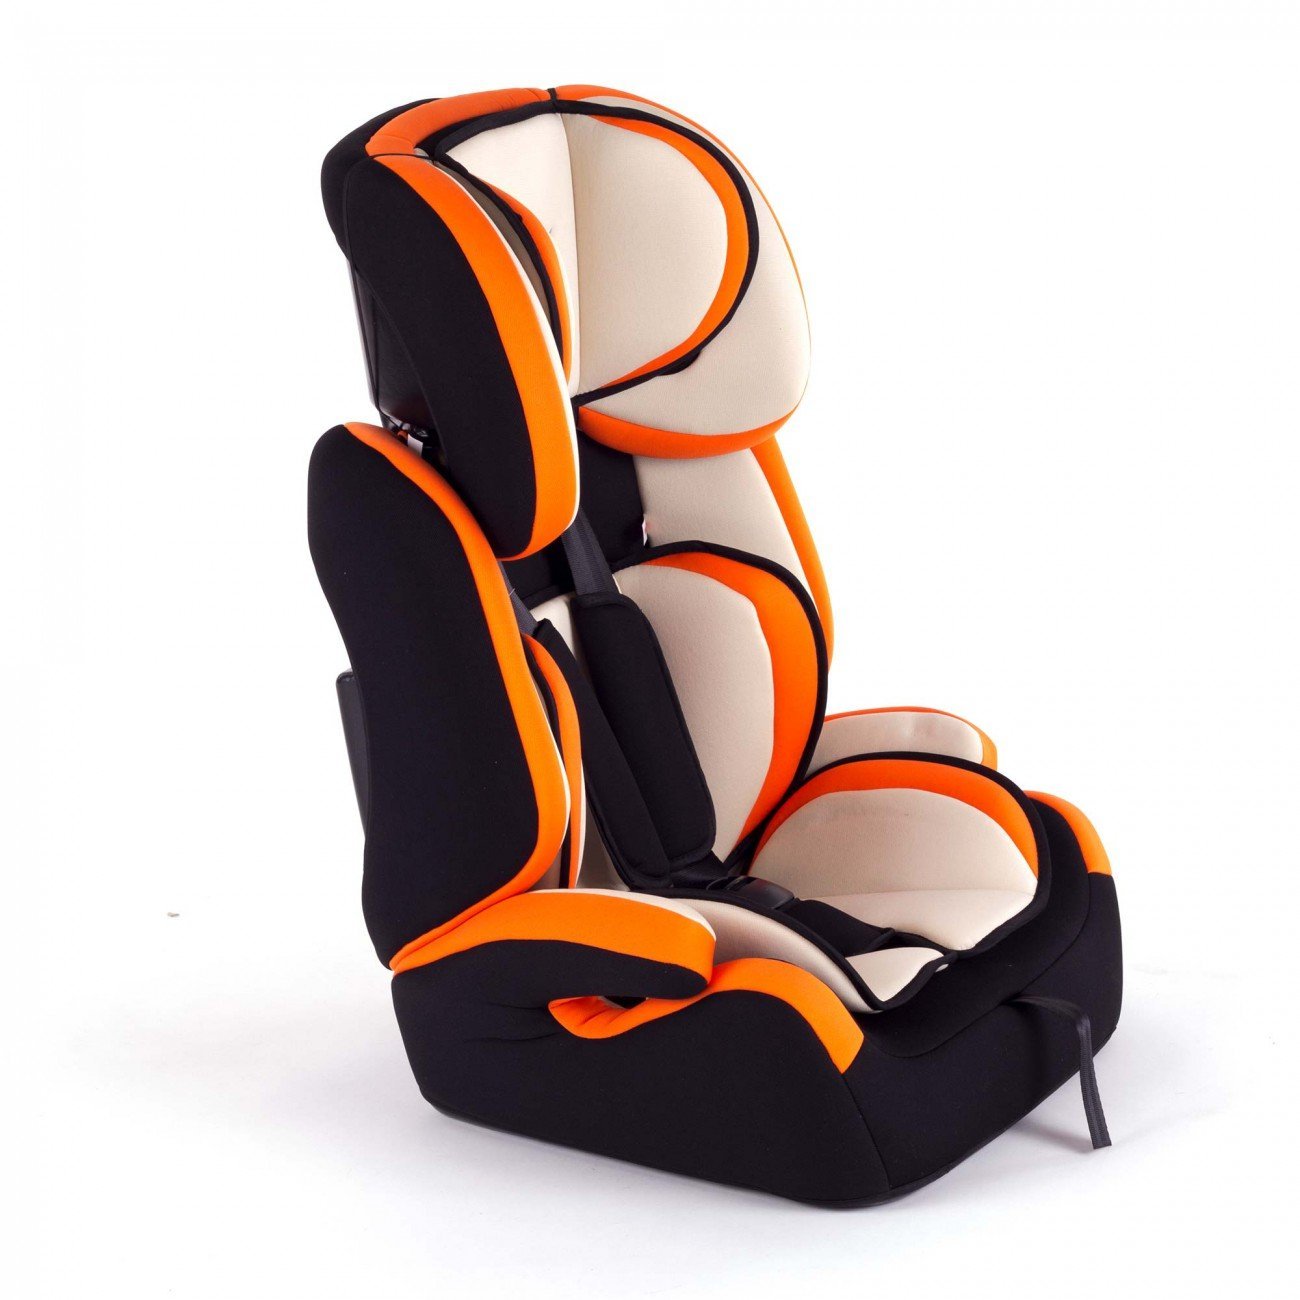 Baby Vivo Car Seat for Child Car Seat child car seat child seat Tom 9-36 kg Group 1 + 2 + 3 Mixed Colour Your Child from 15 Months to 12 Years